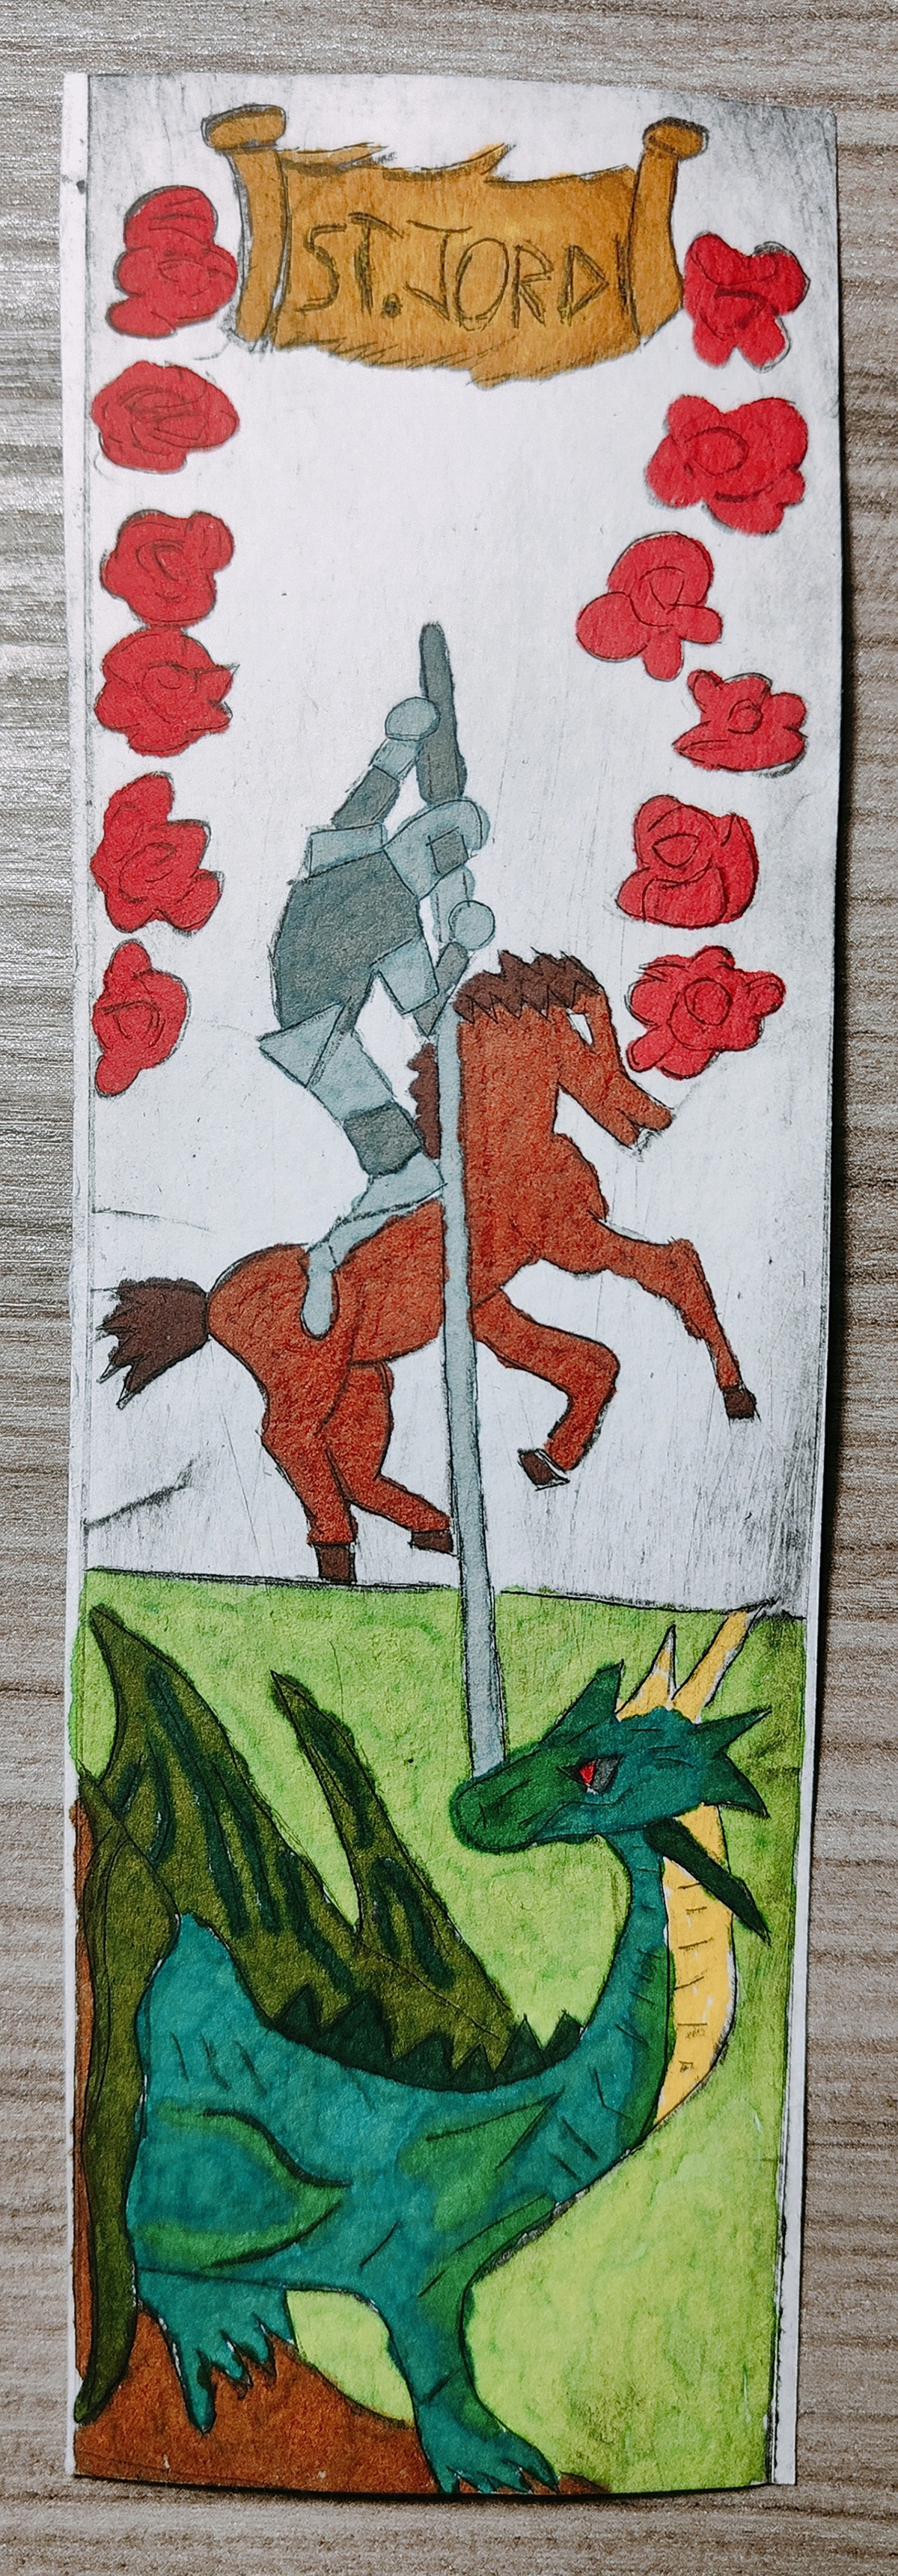 Drawing  stamping bookmarker color st george's day